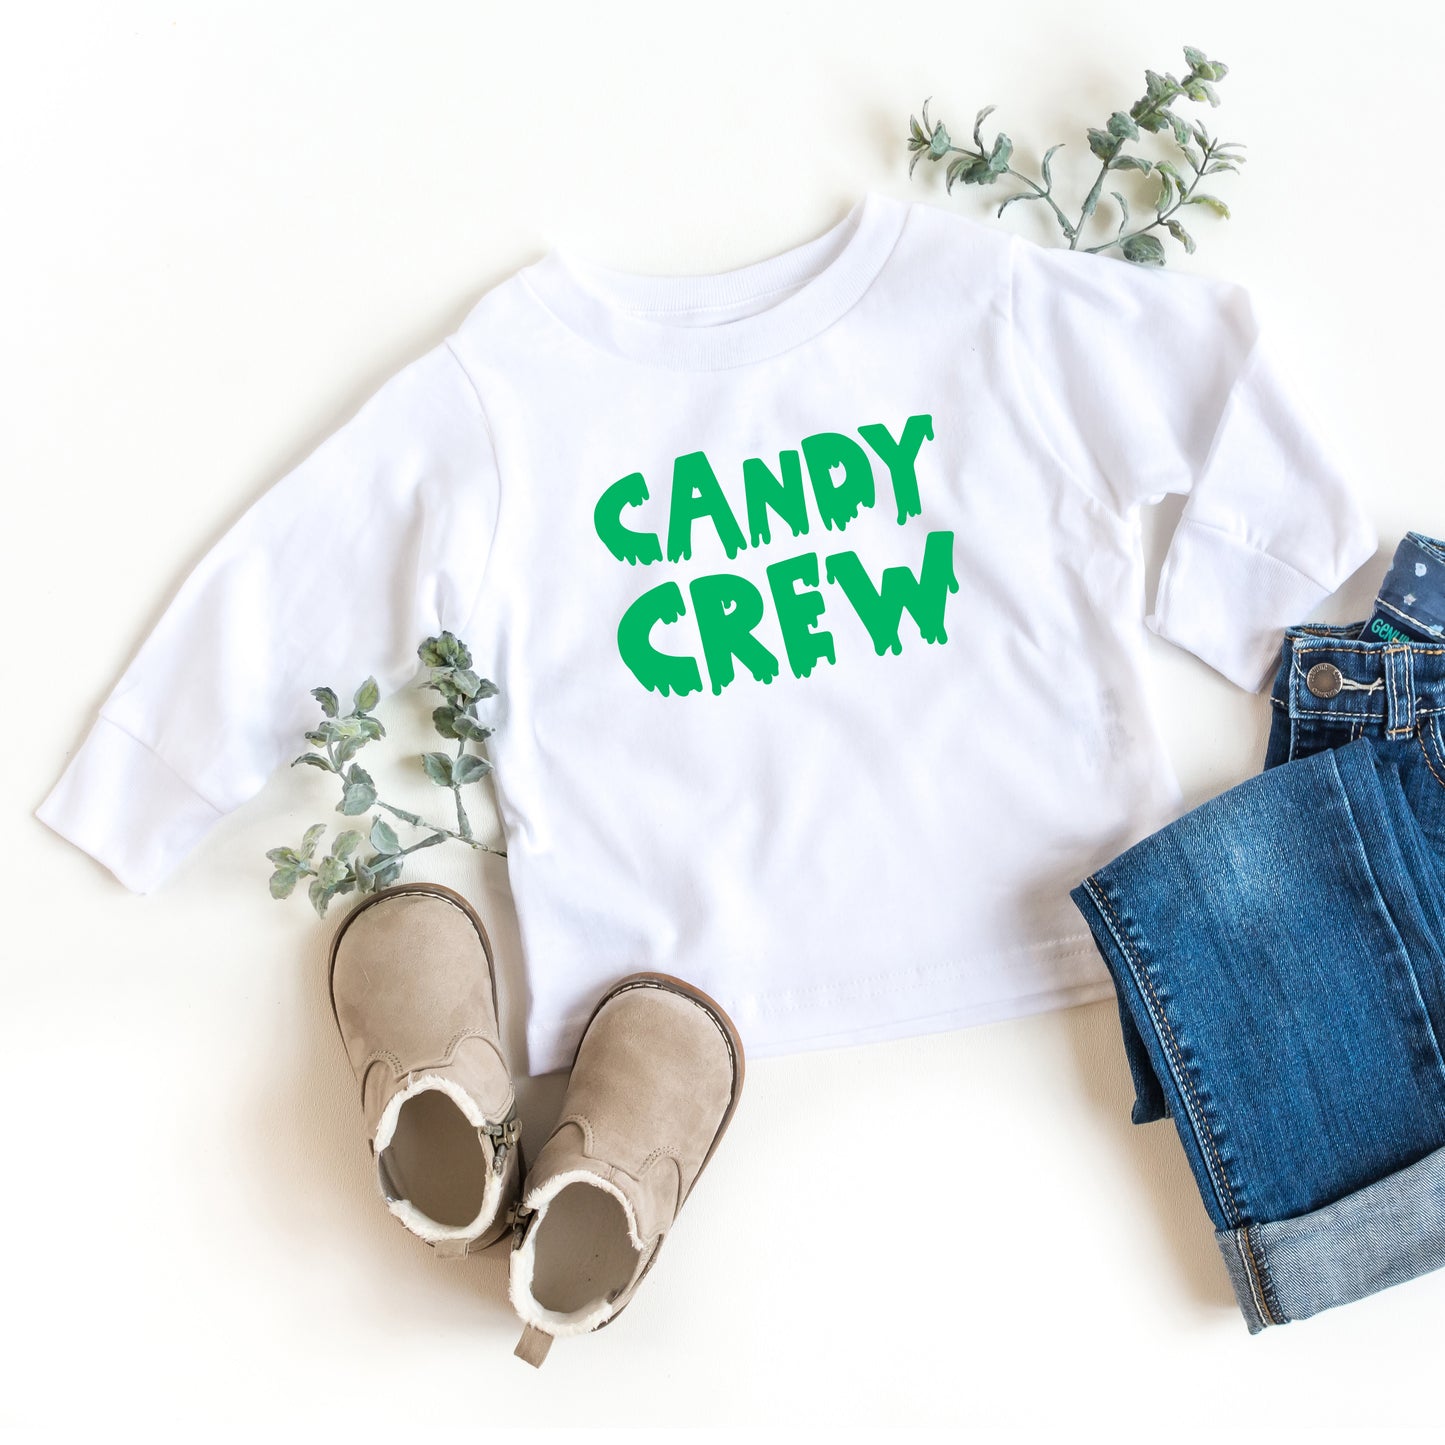 Candy Crew | Toddler Graphic Long Sleeve Tee